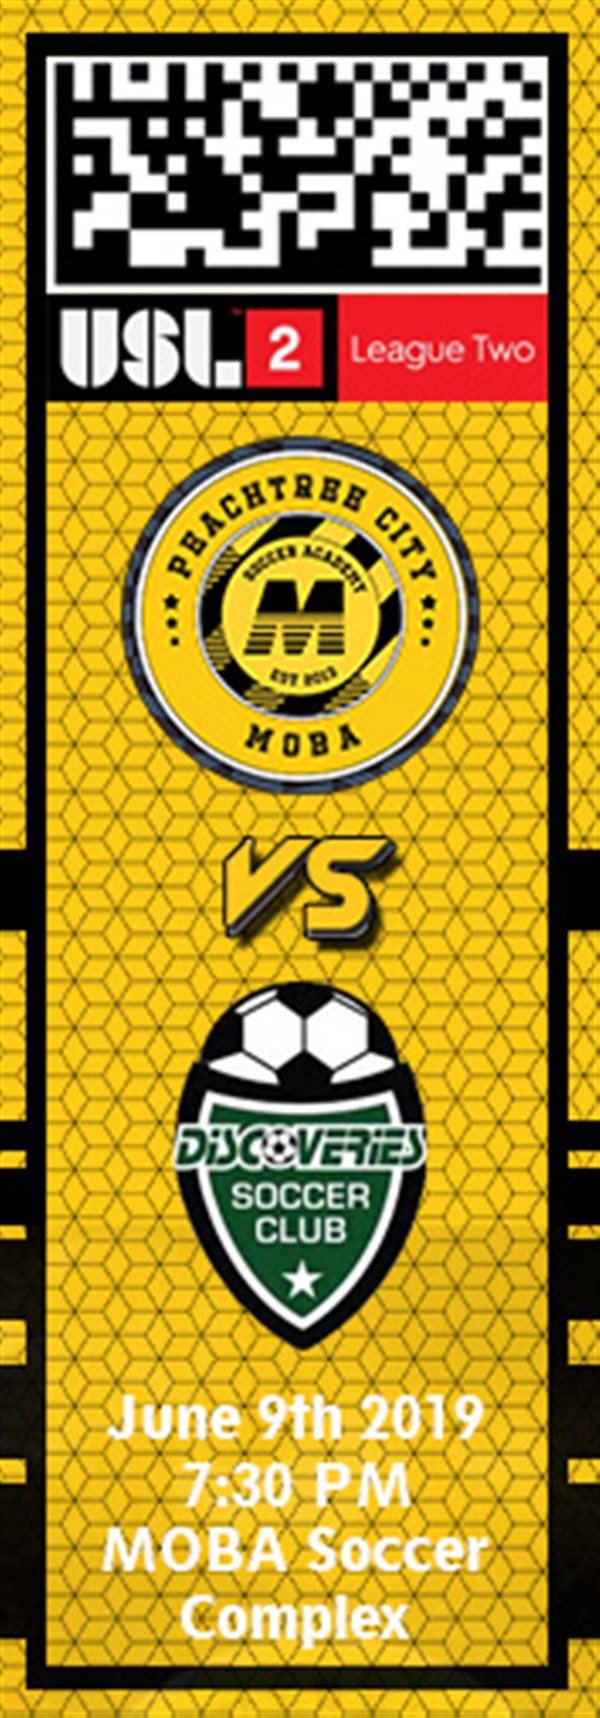 Get Information and buy tickets to PTC MOBA vs. Discoveries USL2 on MOBA Soccer Academy